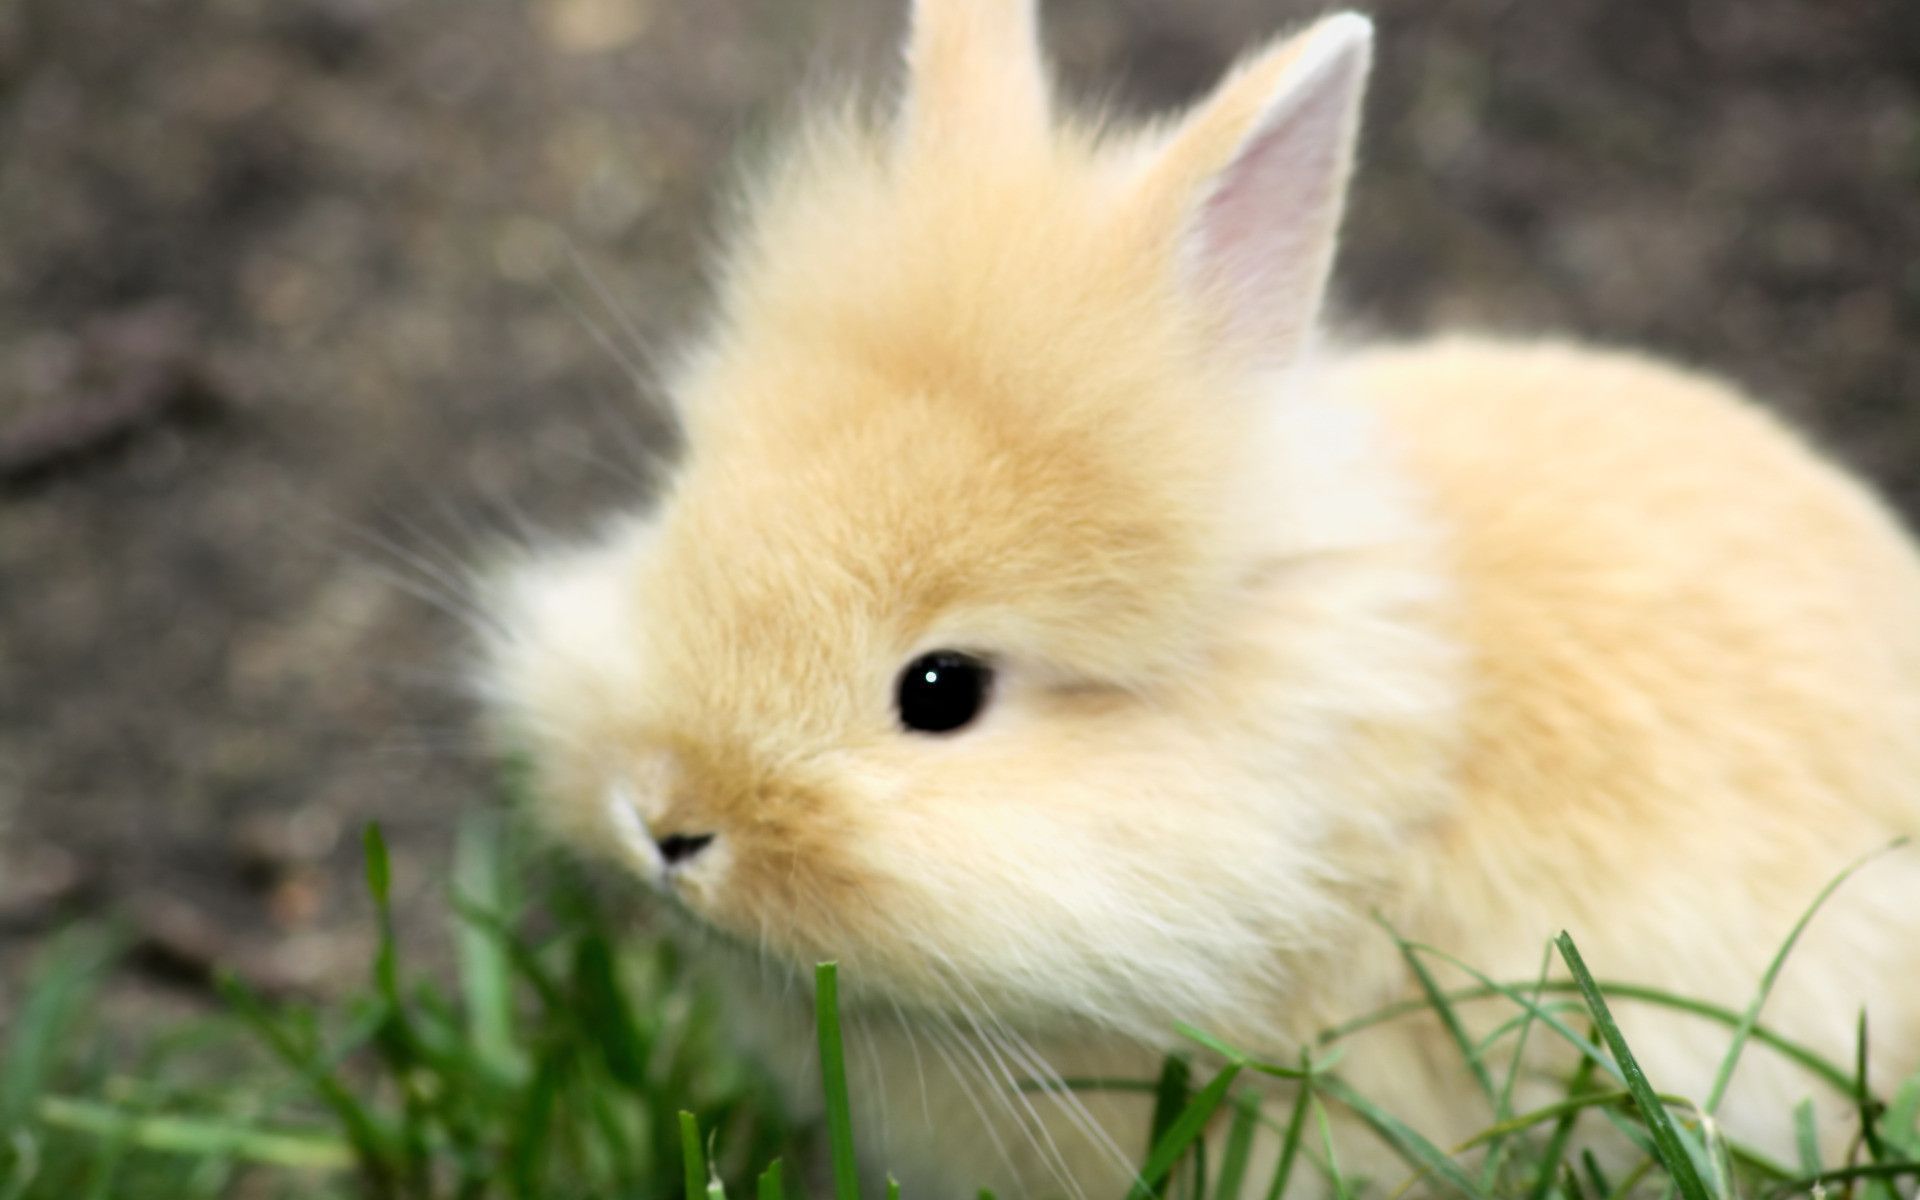 Rabbit HD Wallpaper Background Wallpaper. Cute bunny picture, Cute baby bunnies, Cute baby animals